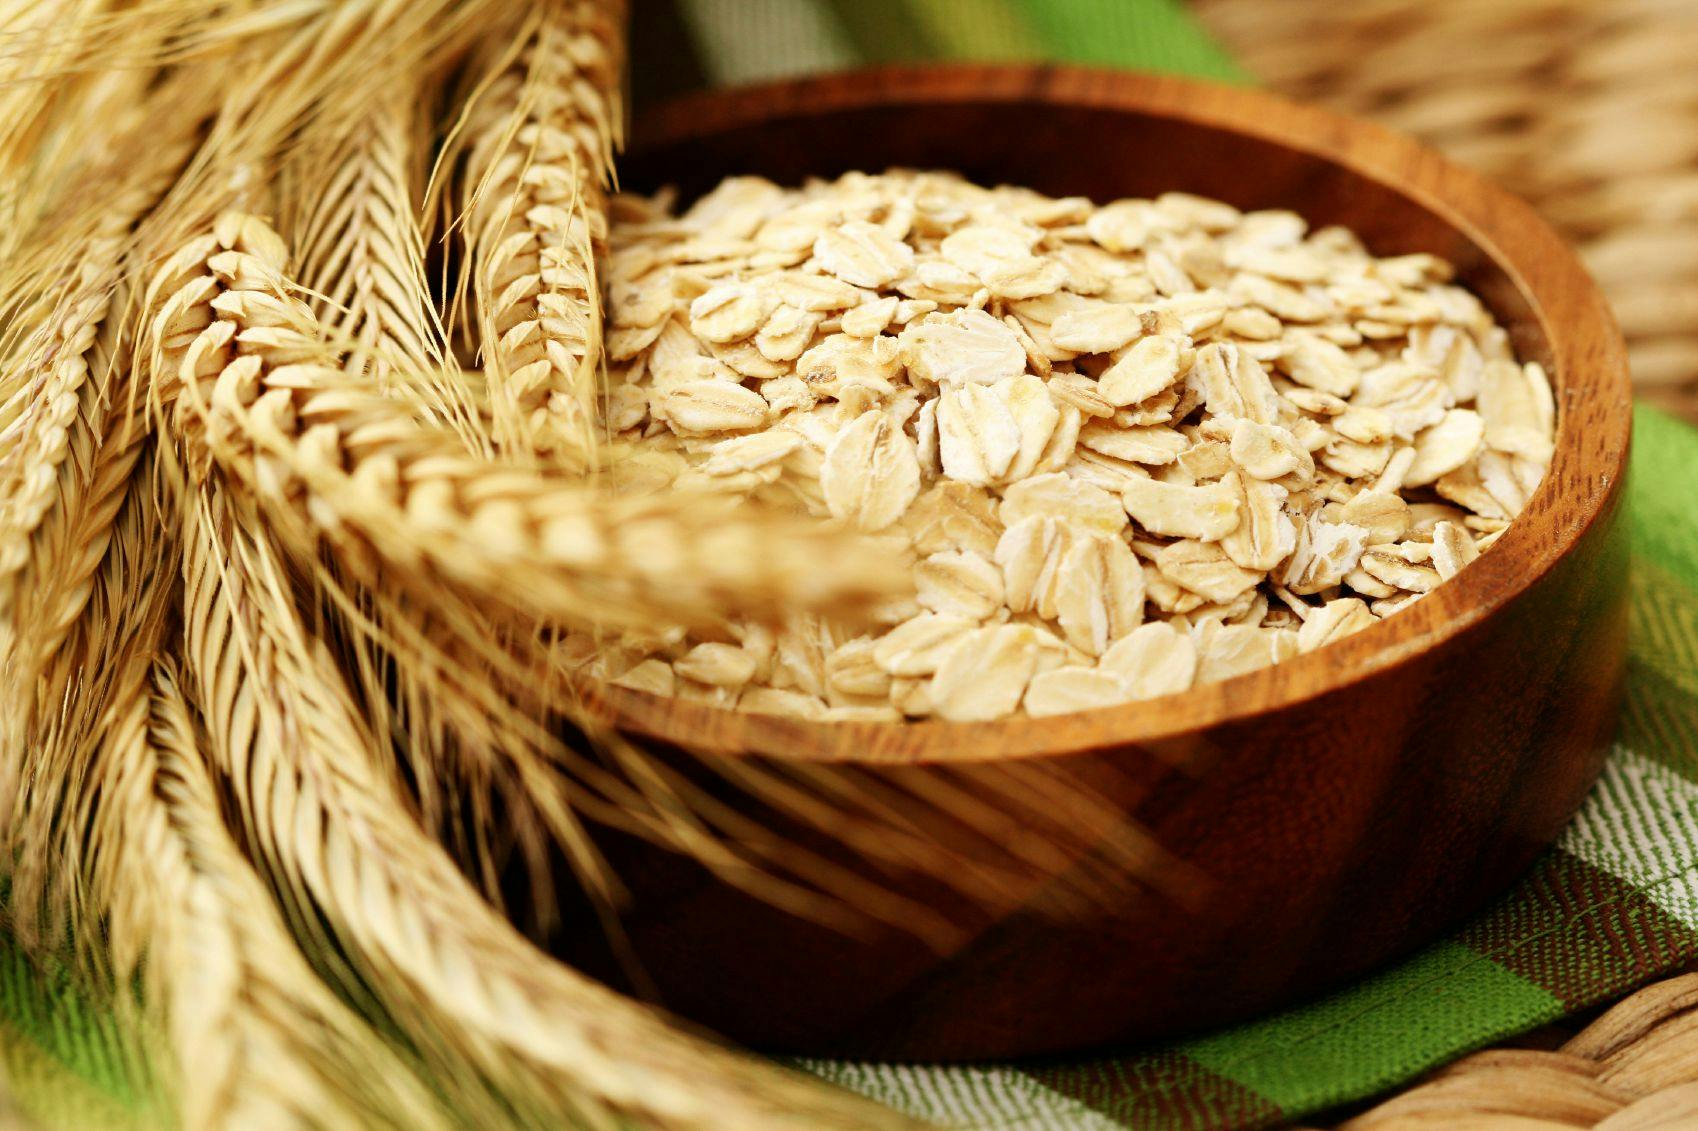 New Oat Beta-Glucans Added to Naturex’s Heart-Health Ingredients at Vitafoods Europe 